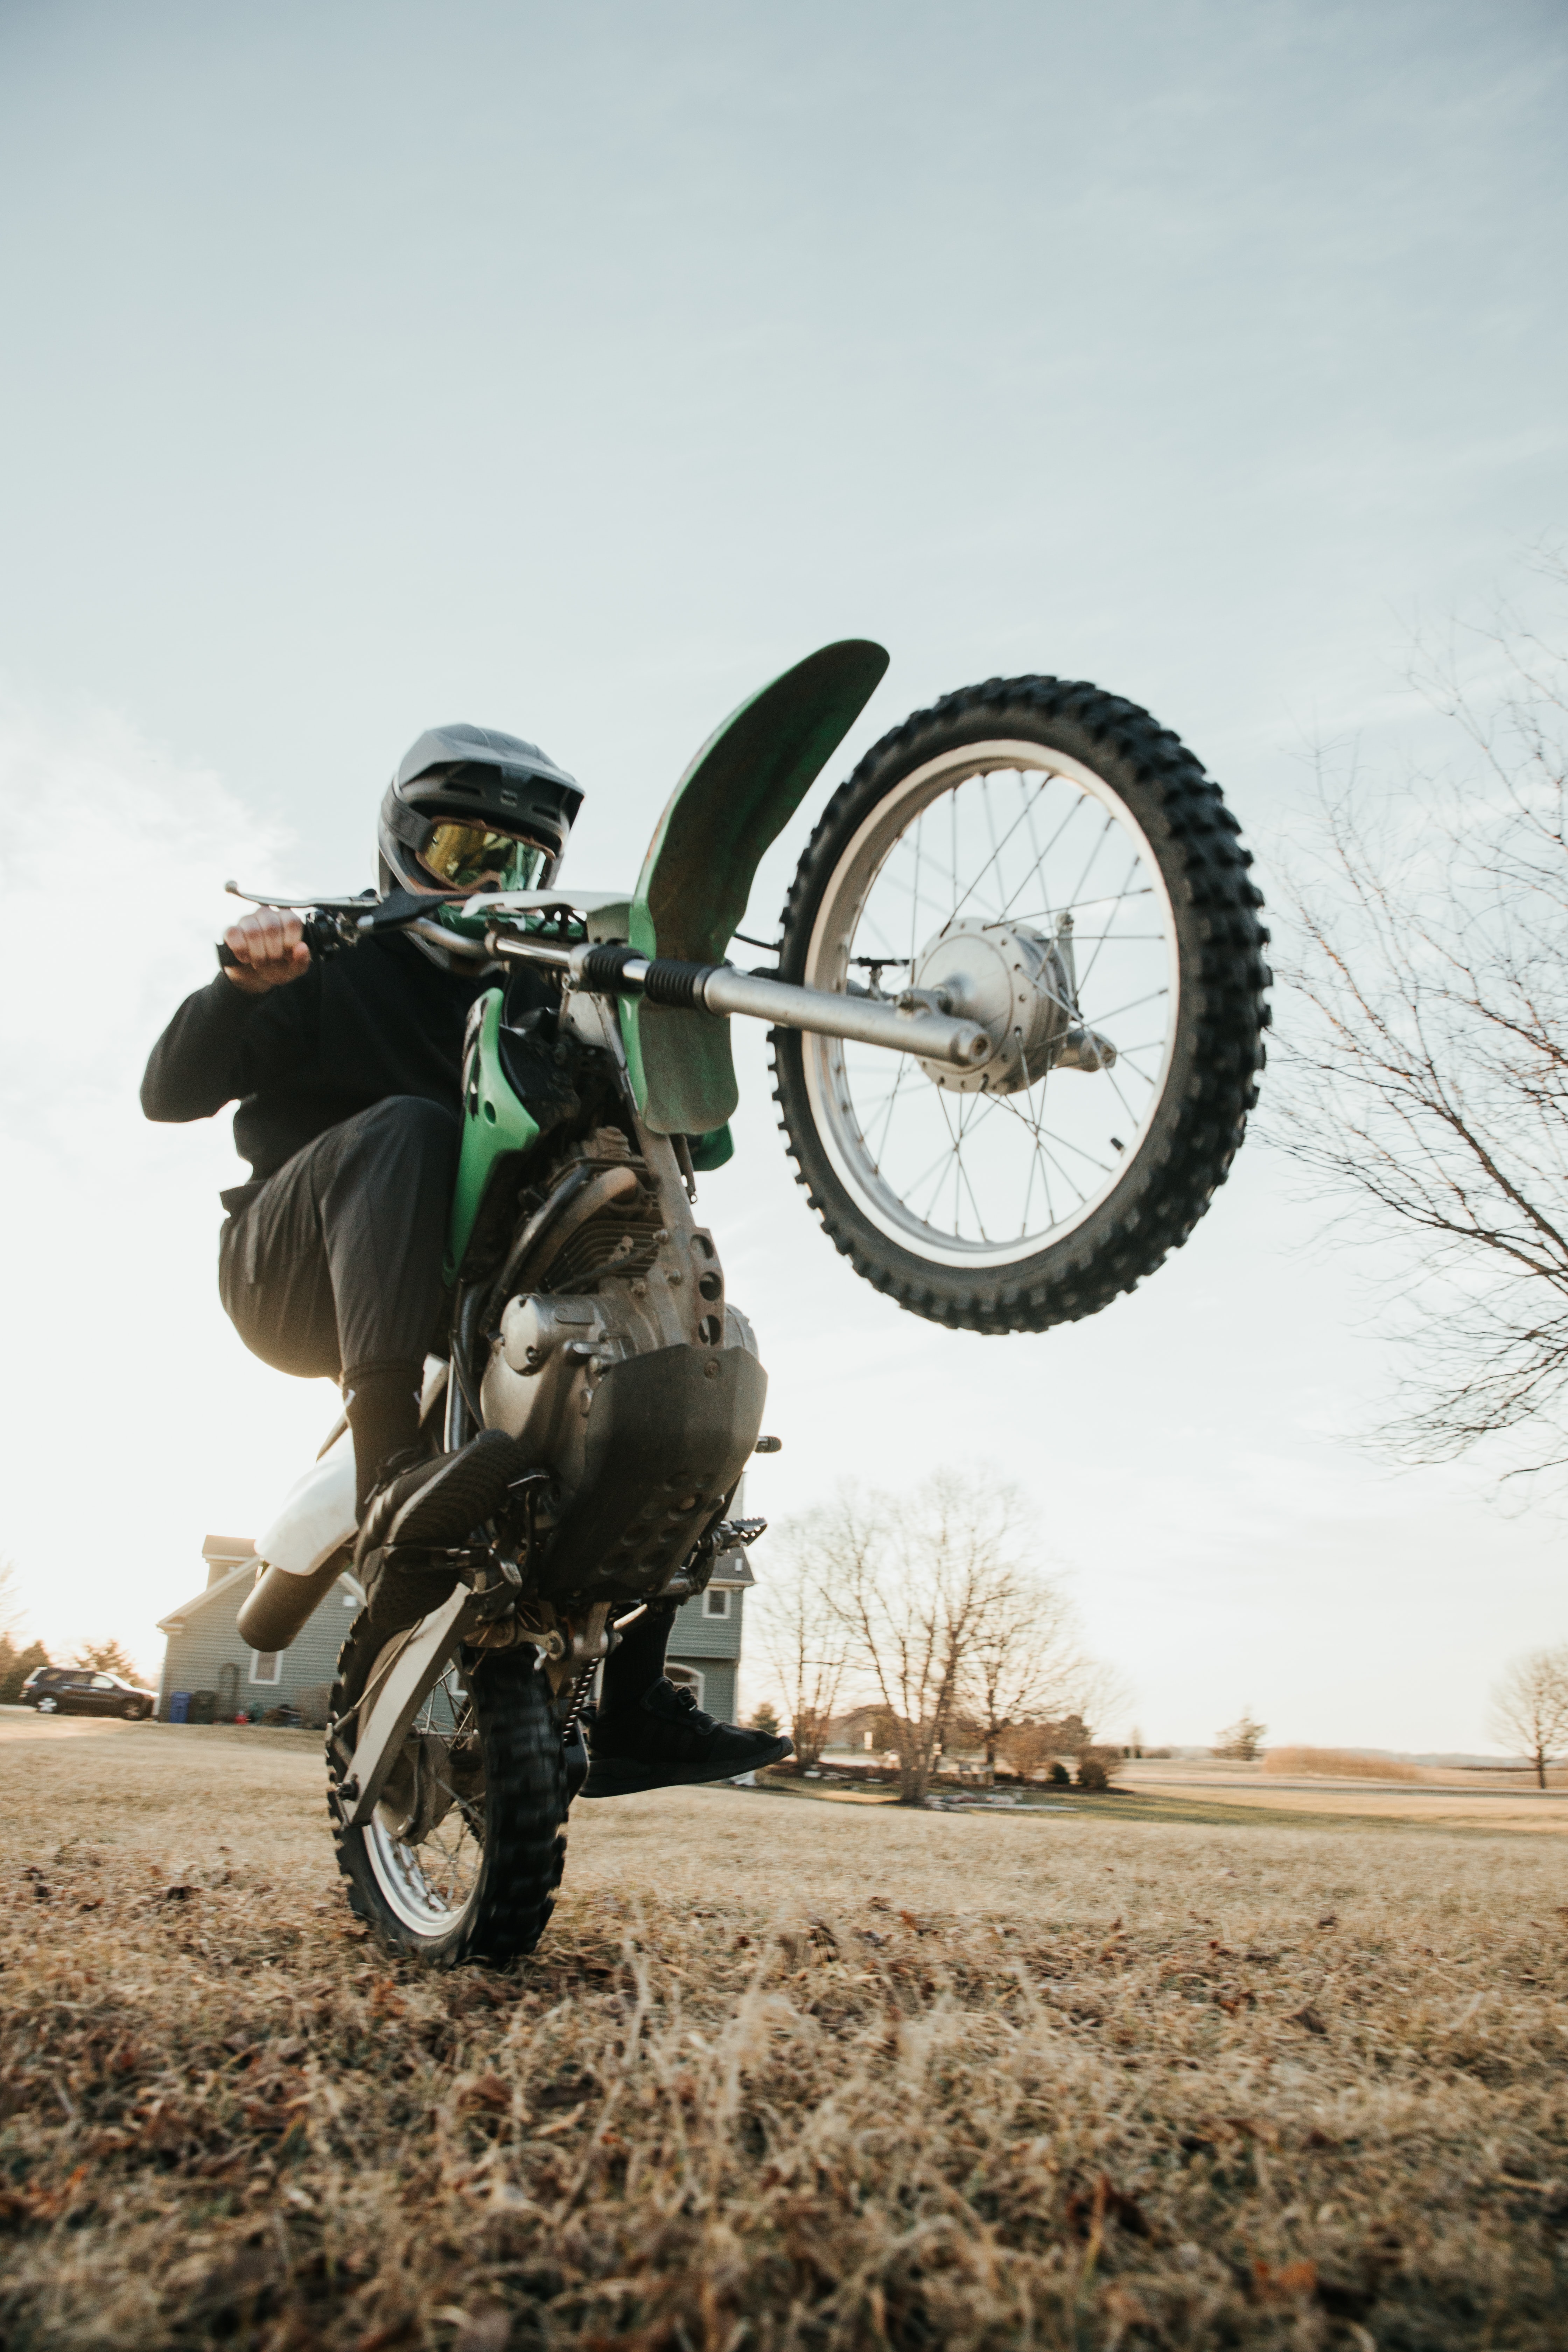 motorcycles, green, motorcyclist, motorcycle, wheel, trick